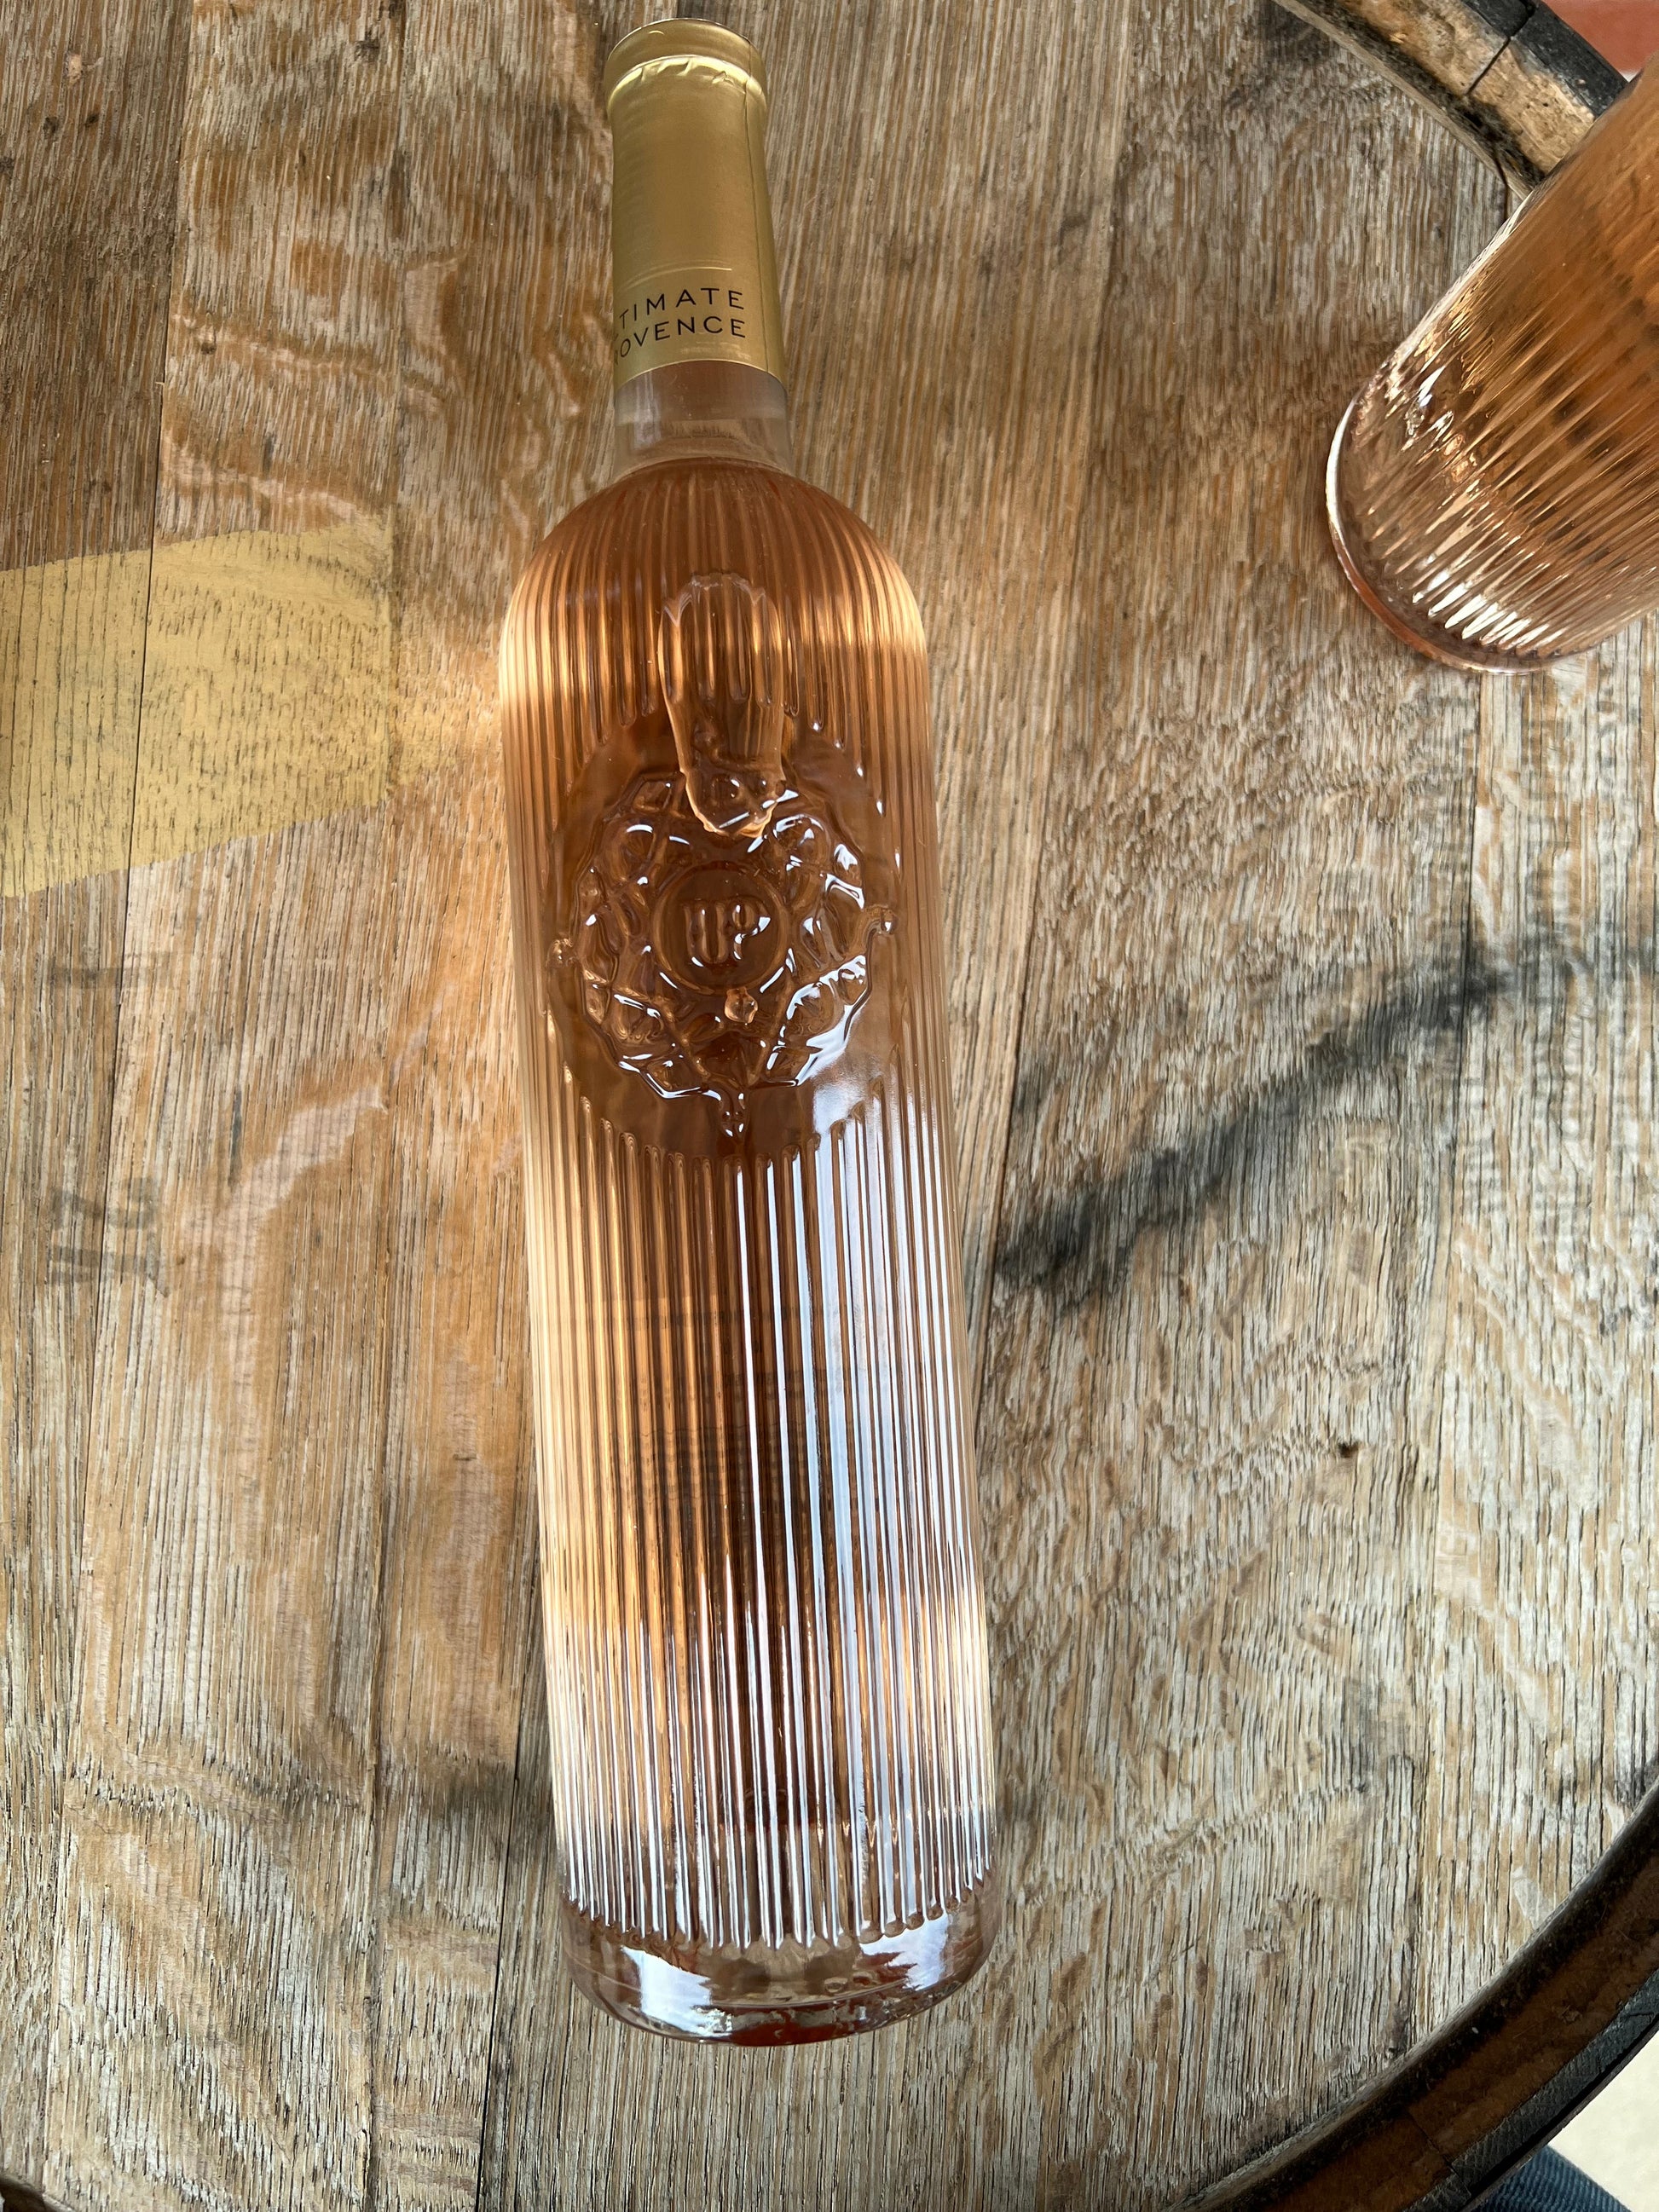 Ultimate Provence Rose - Your Wine Stop   -   Denver, NC